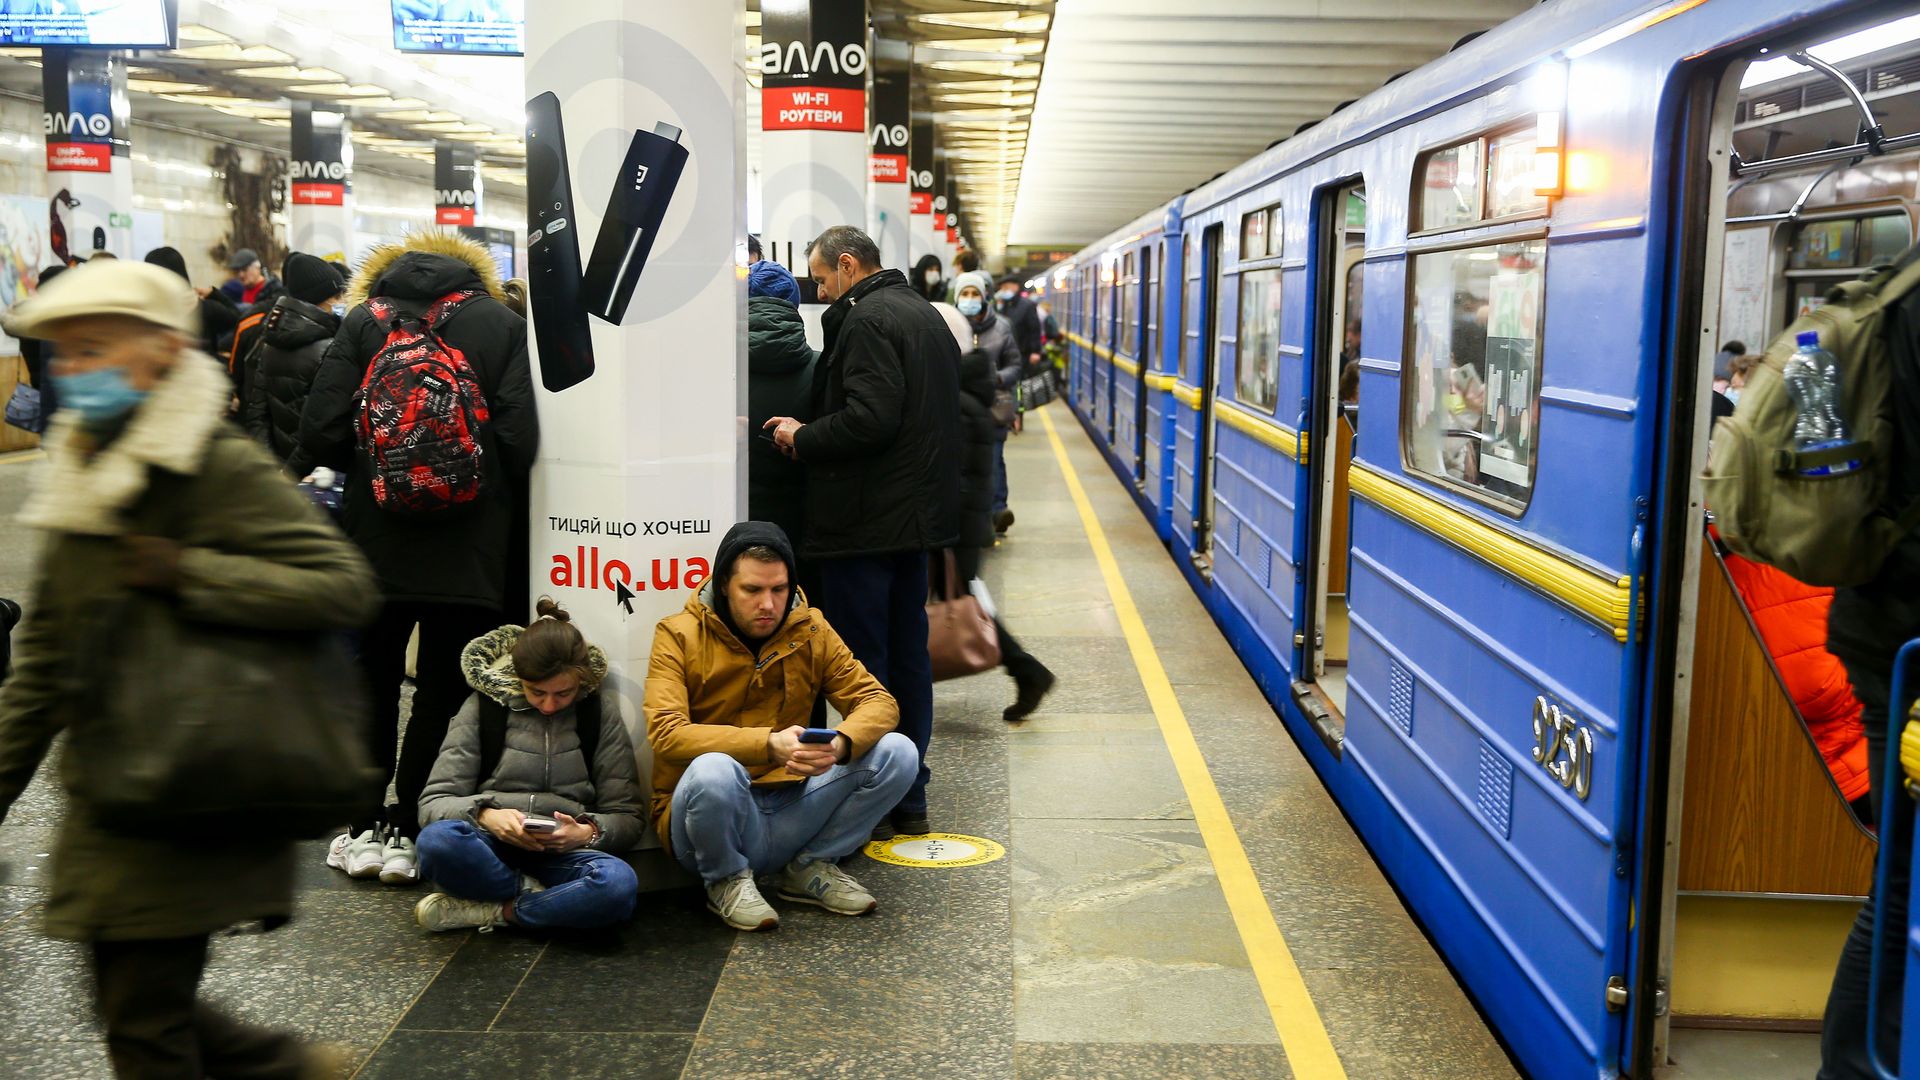 Residents of Kyiv huddle in a subway station amid Thursday's assault by Russia.